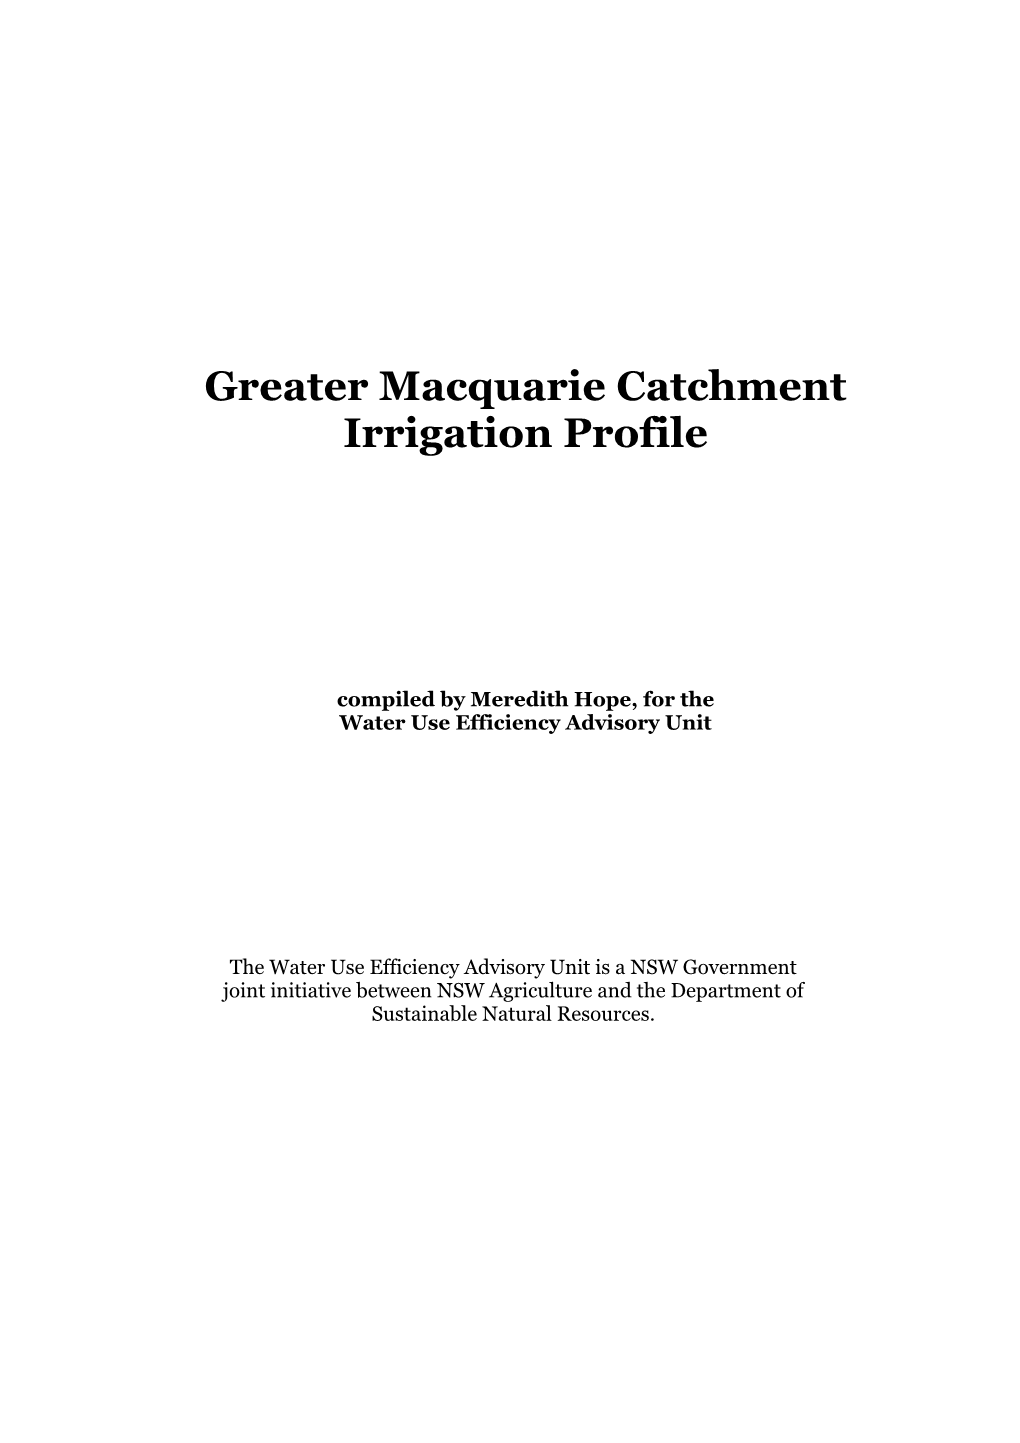 Greater Macquarie Catchment Irrigation Profile